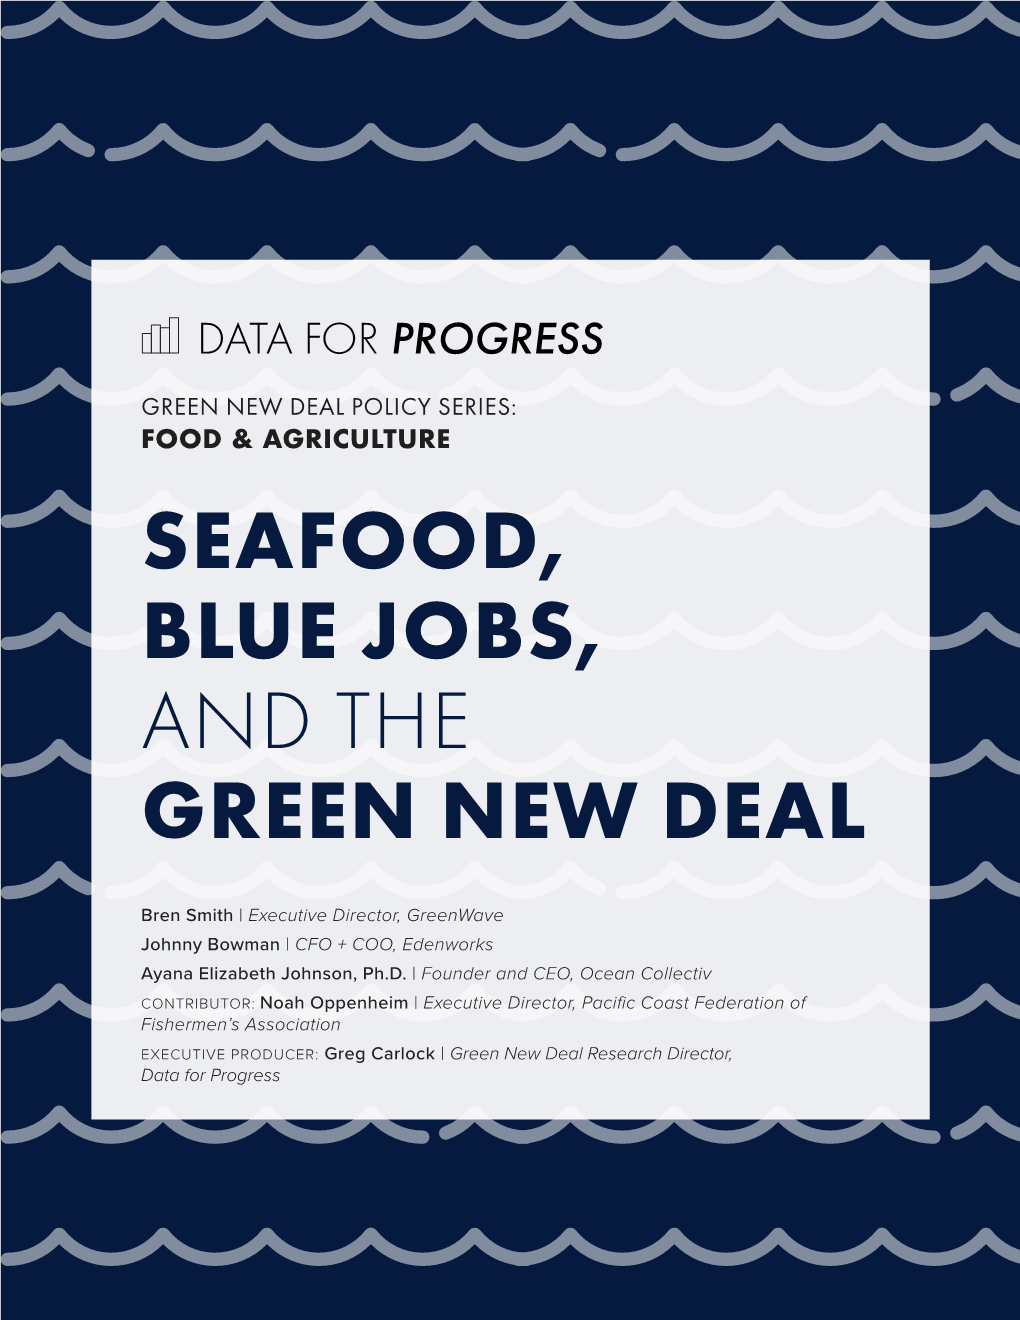 Seafood, Blue Jobs, and the Green New Deal